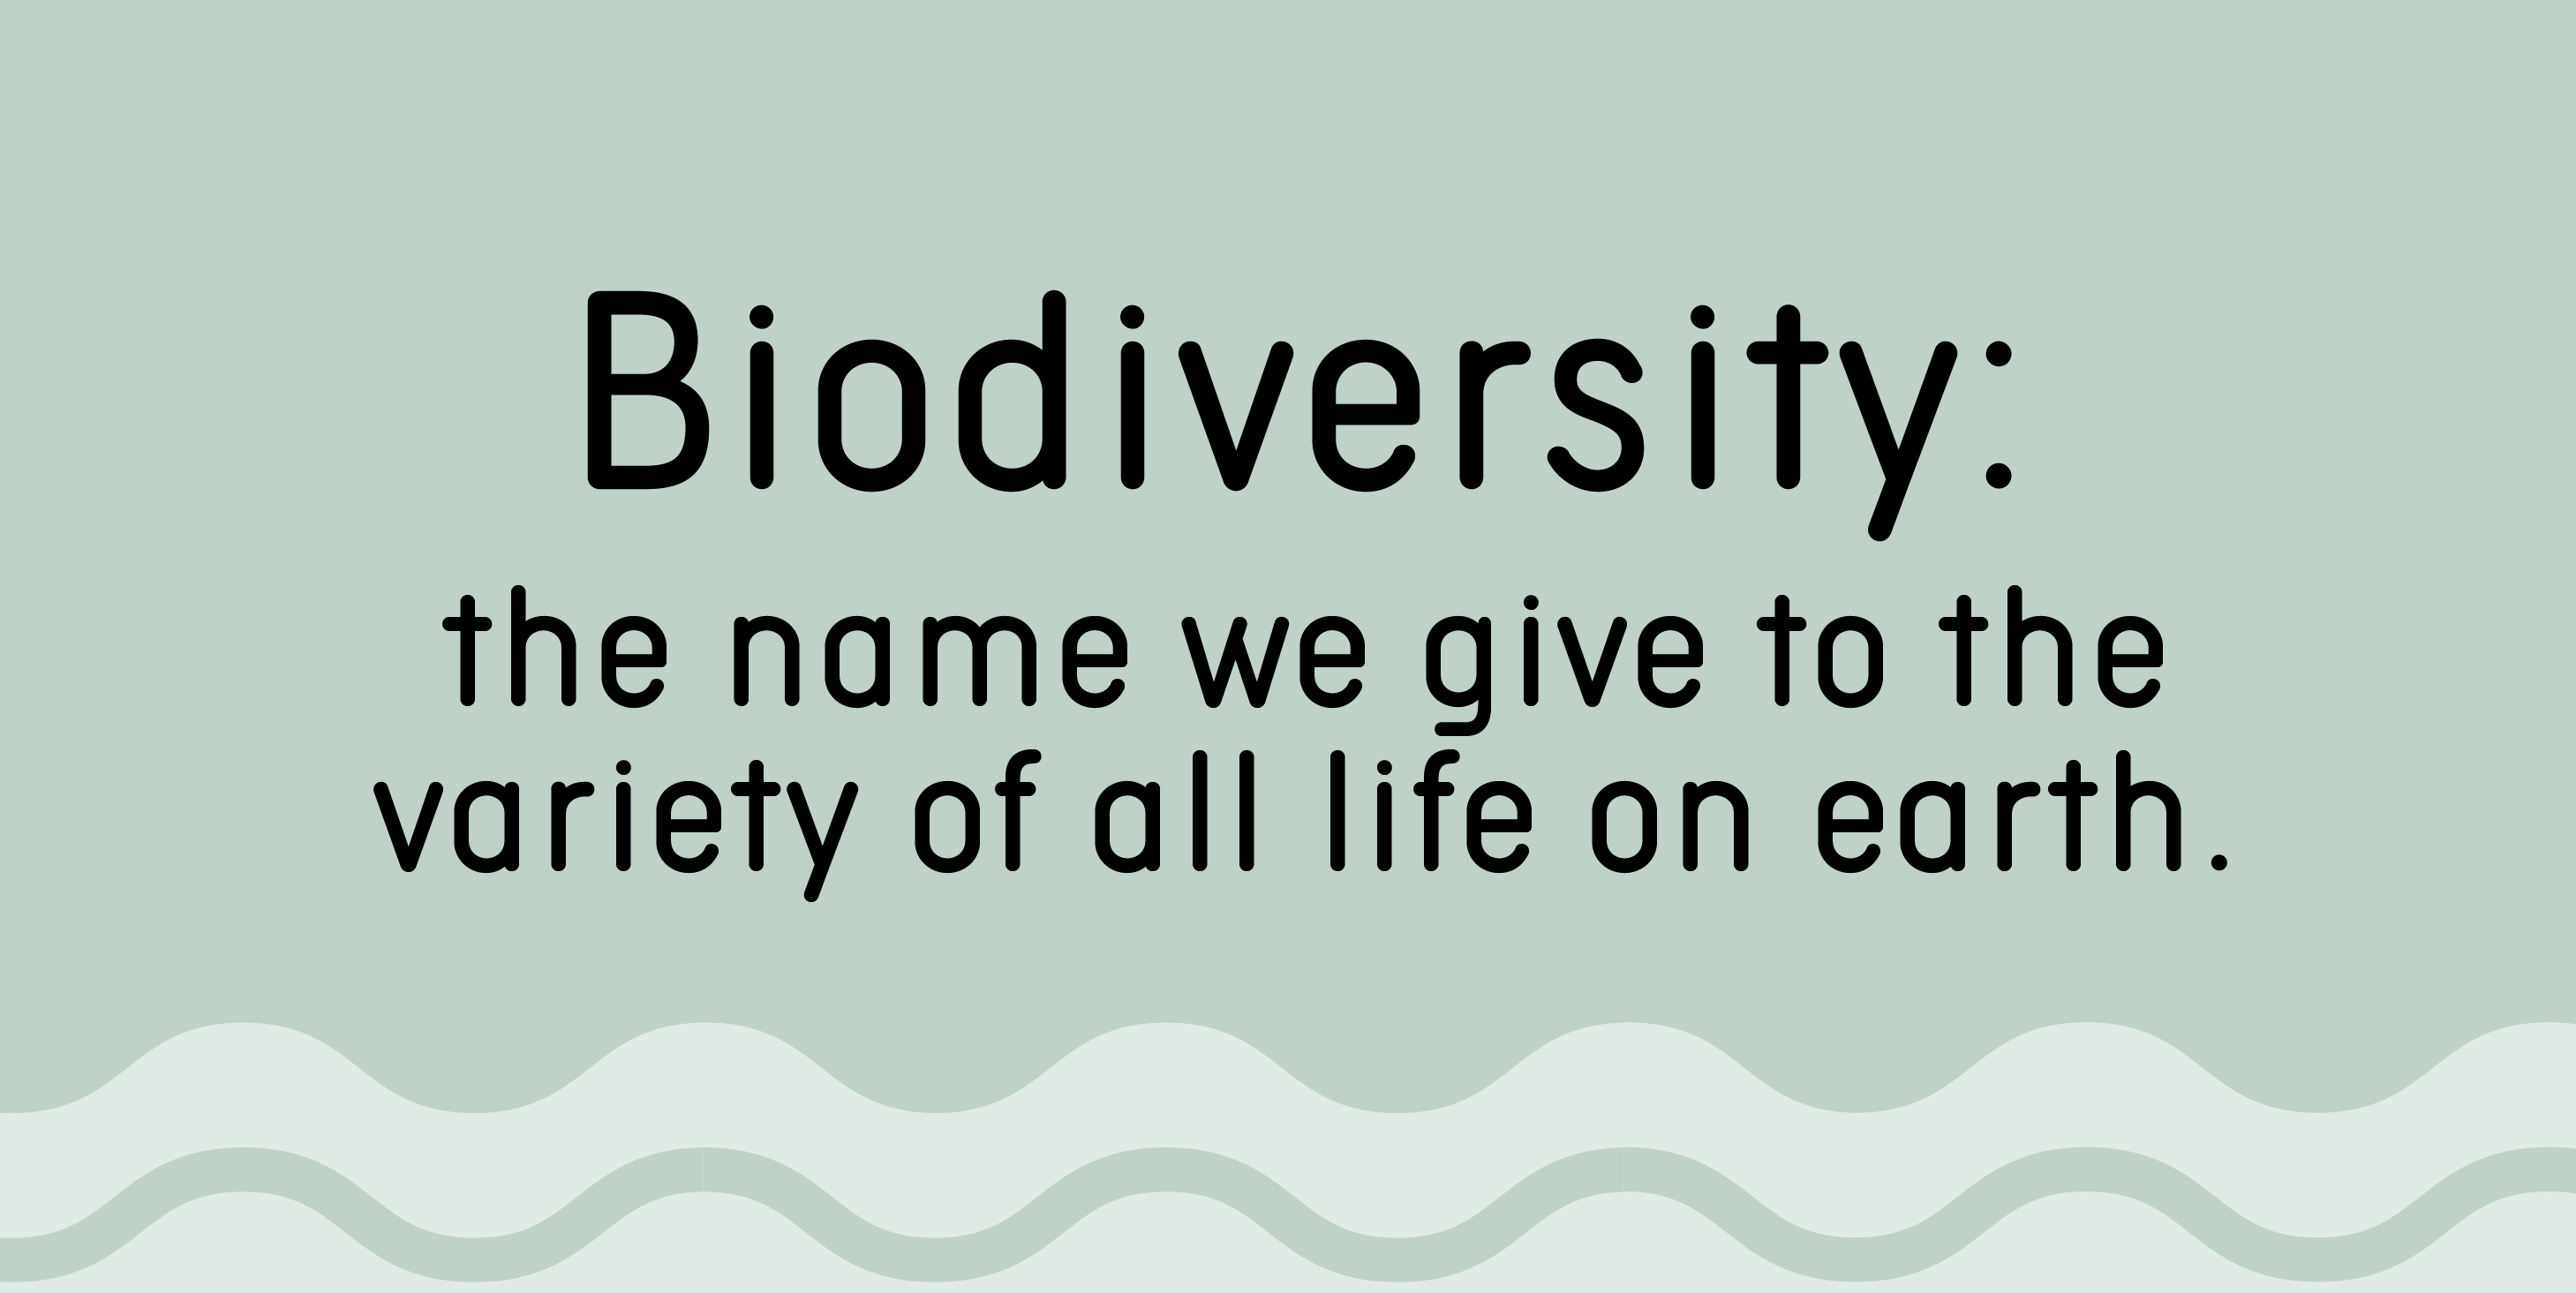 Biodiversity: the name we give to the variety of all life on earth.